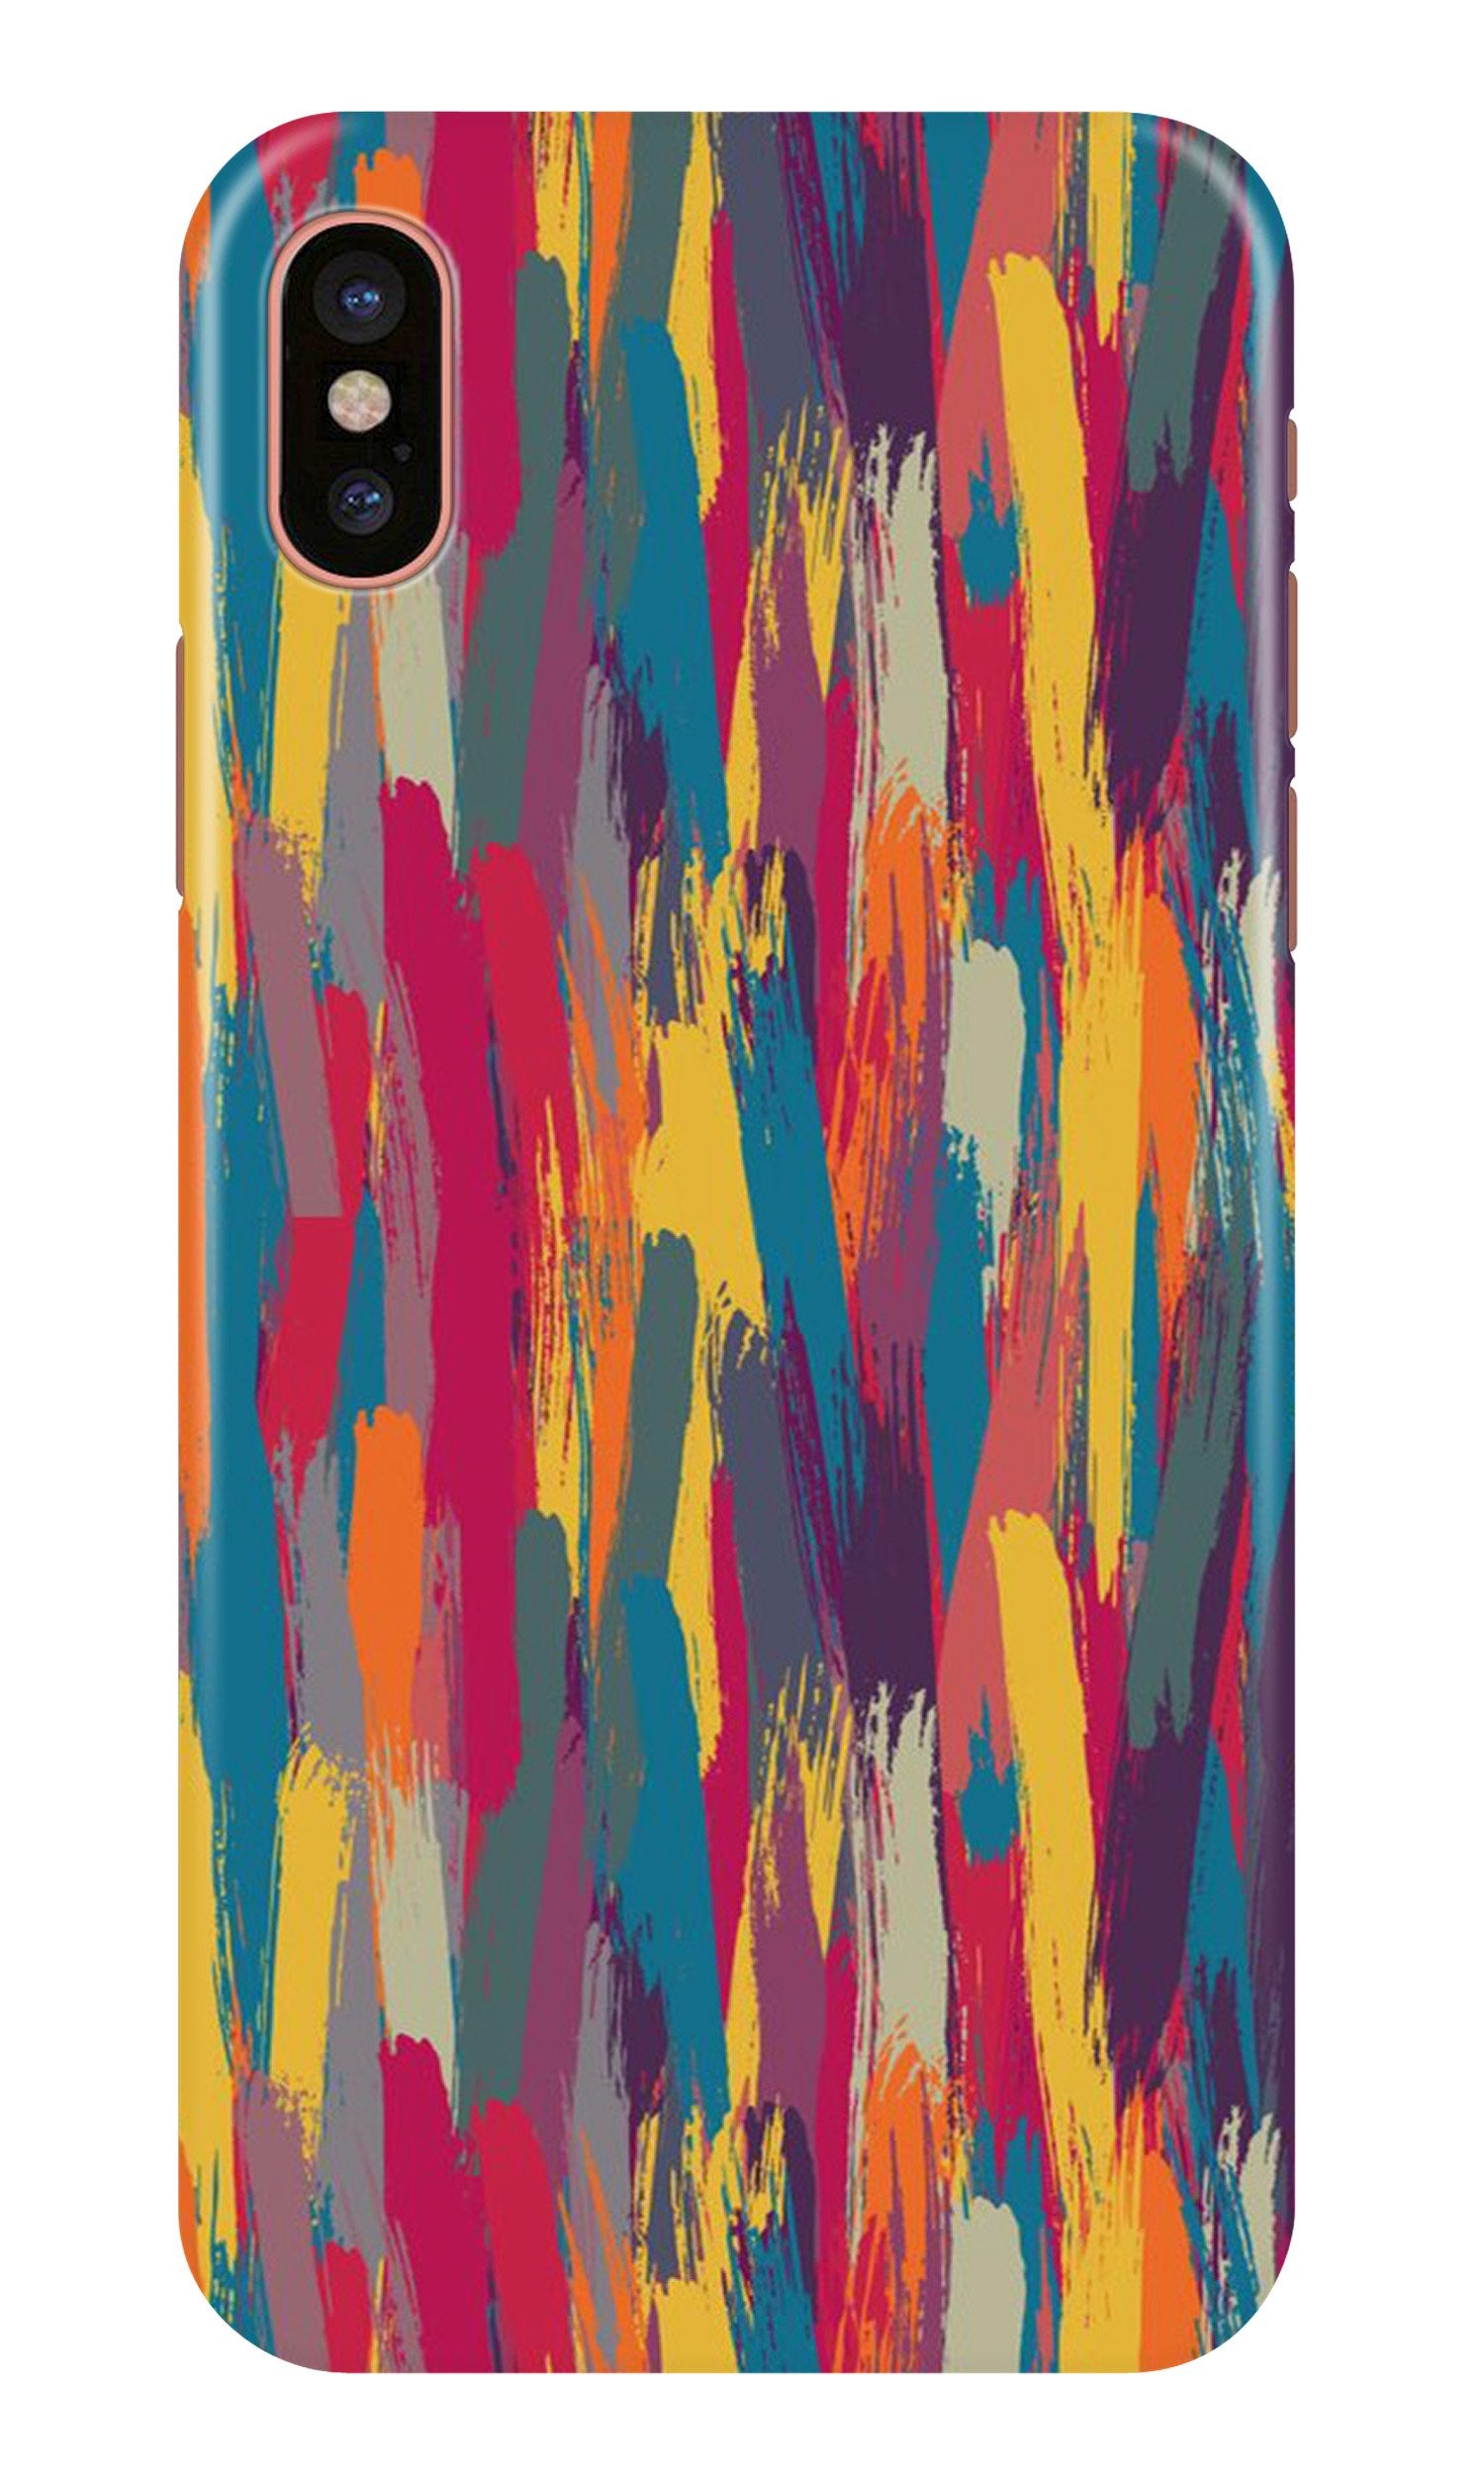 Modern Art Case for iPhone Xs Max (Design No. 242)